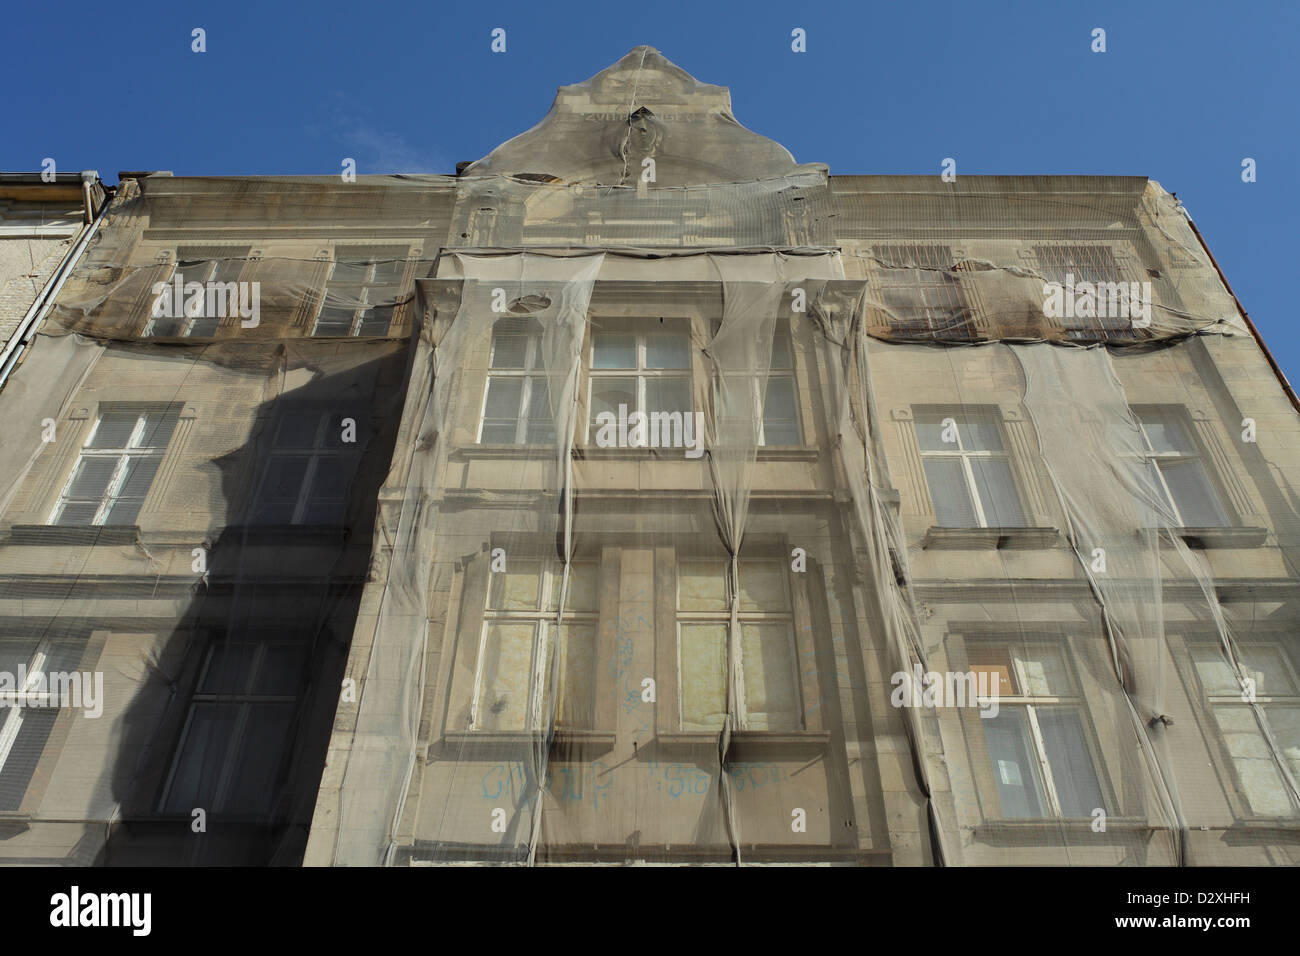 Berlin, Germany, gauze before an unrenovated old protects against falling facade parts Stock Photo